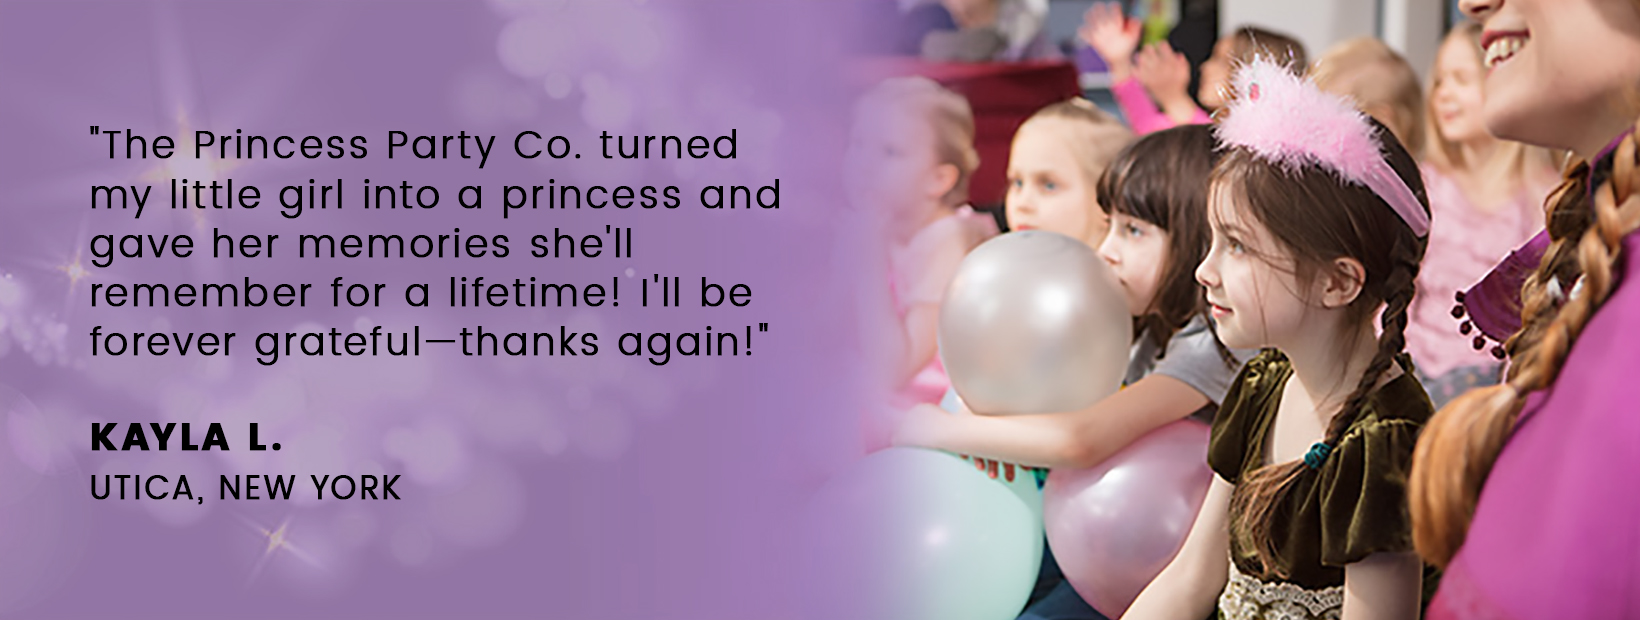 The Princess Party Co. turned my little girl into a princess and gave her memories she'll remember for a lifetime! I'll be forever grateful—thanks again!
													KAYLA L.
													UTICA, NEW YORK